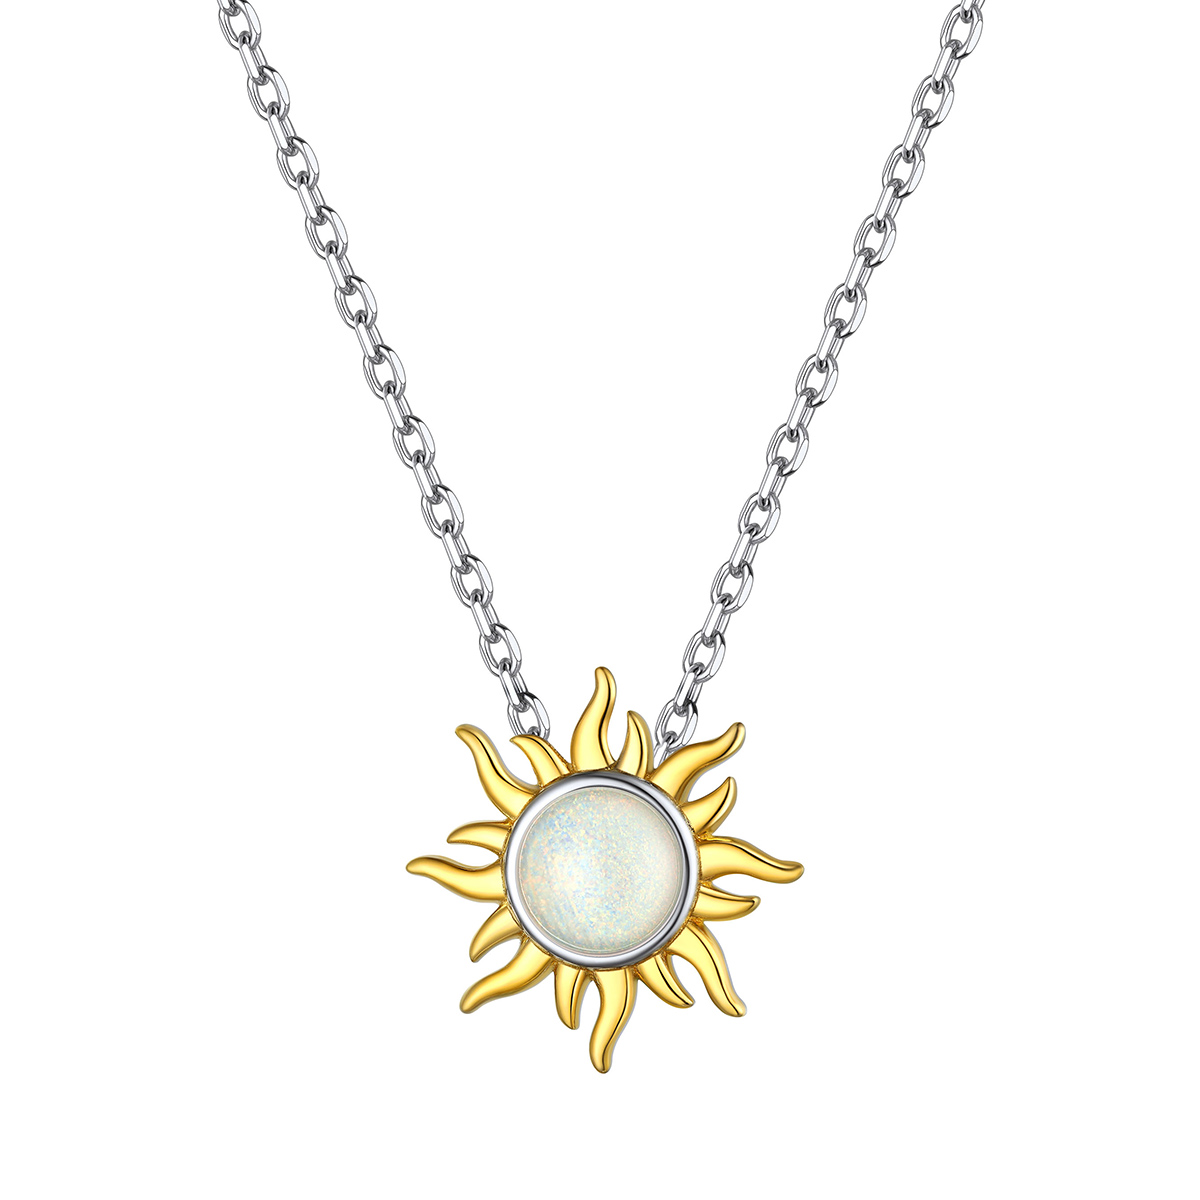 ChicSilver 925 Sterling Silver Opal Necklace Sun Necklace For Women